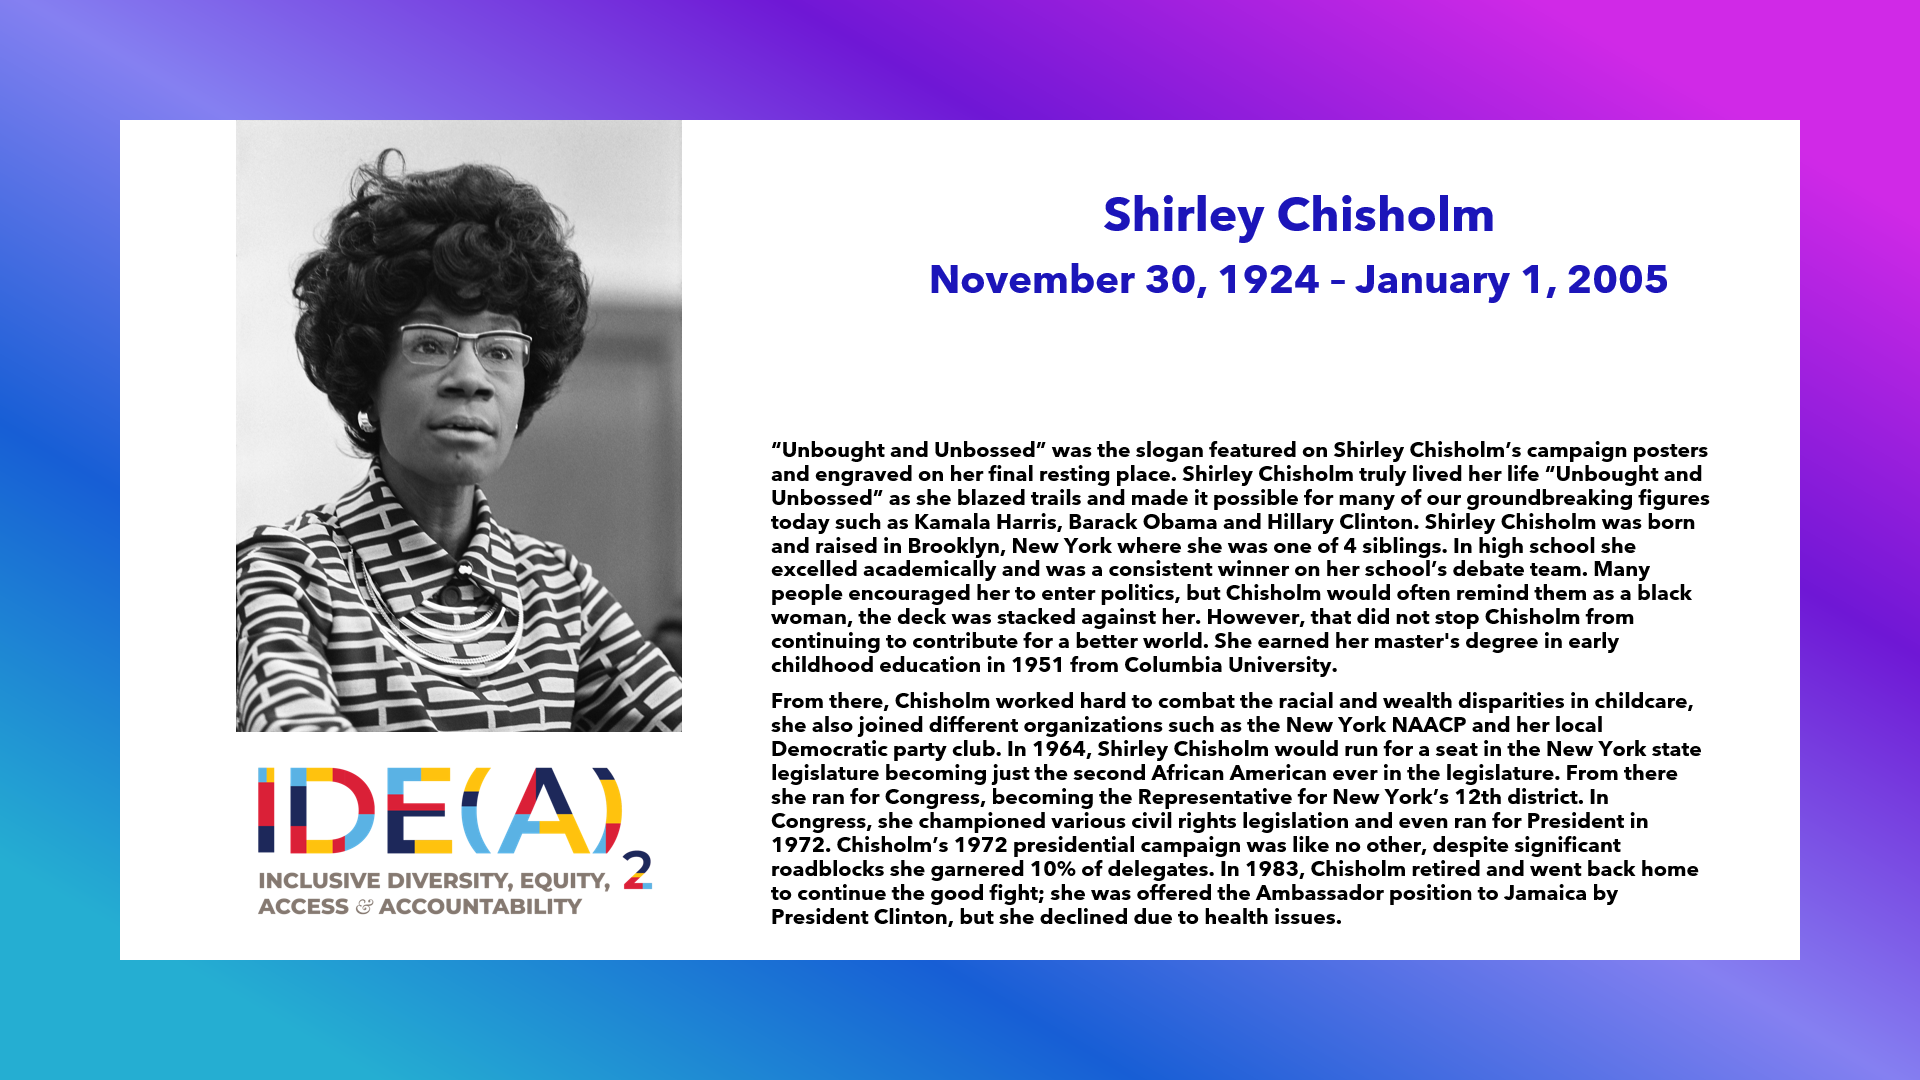 Notable person in Women's History Month, Shirley Chisholm